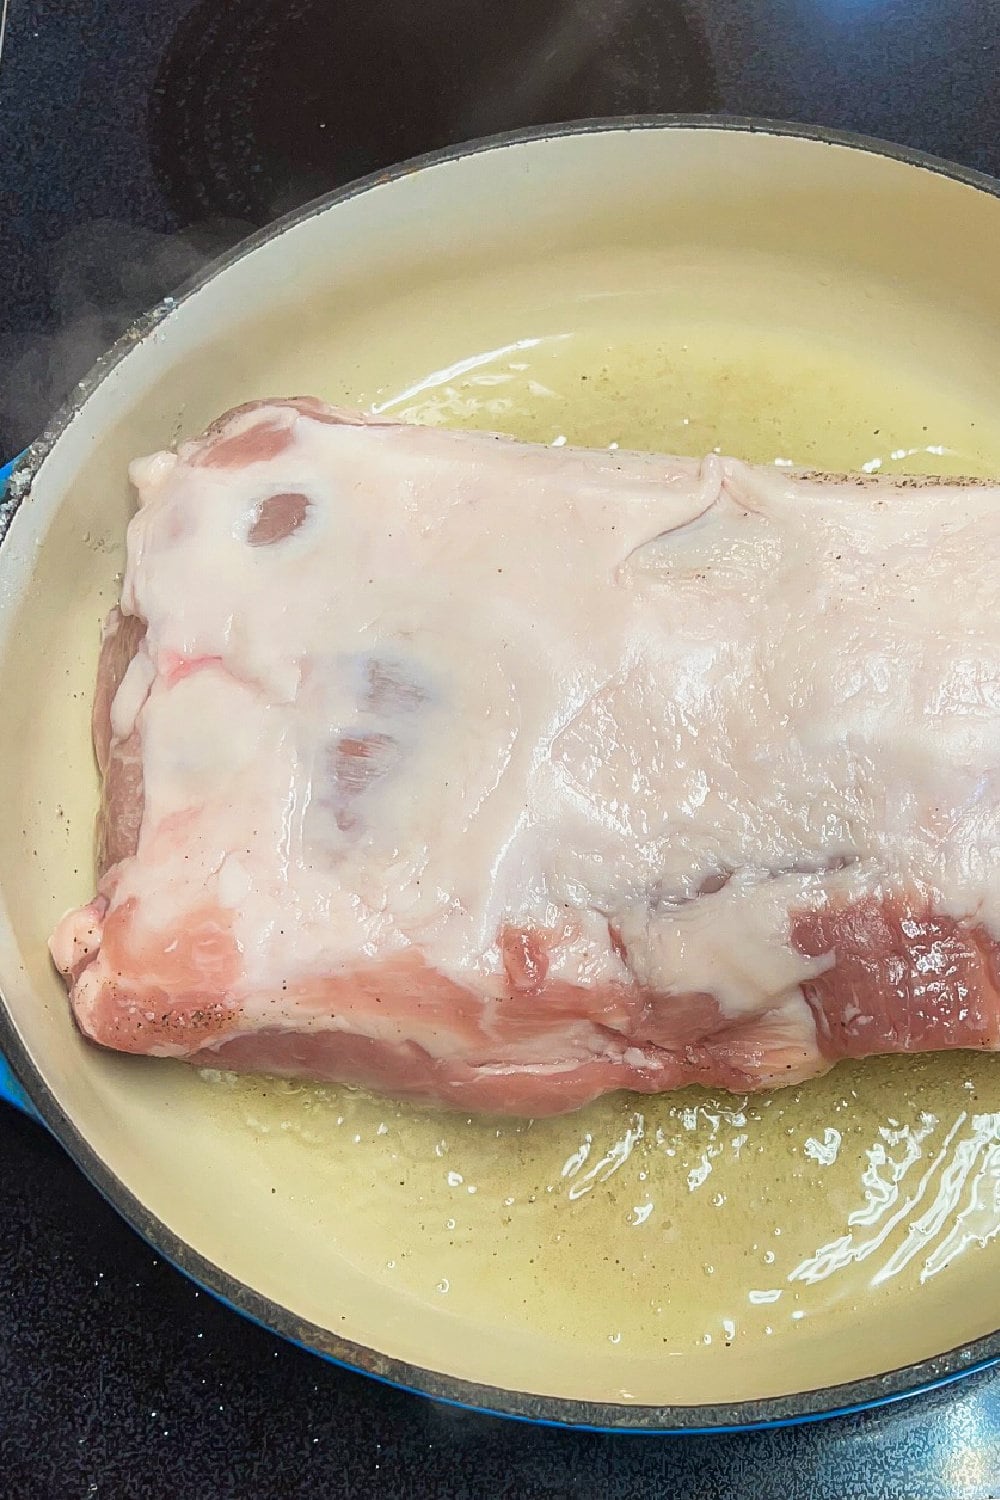 Searing a pork loin in hot oil, fat-side up.